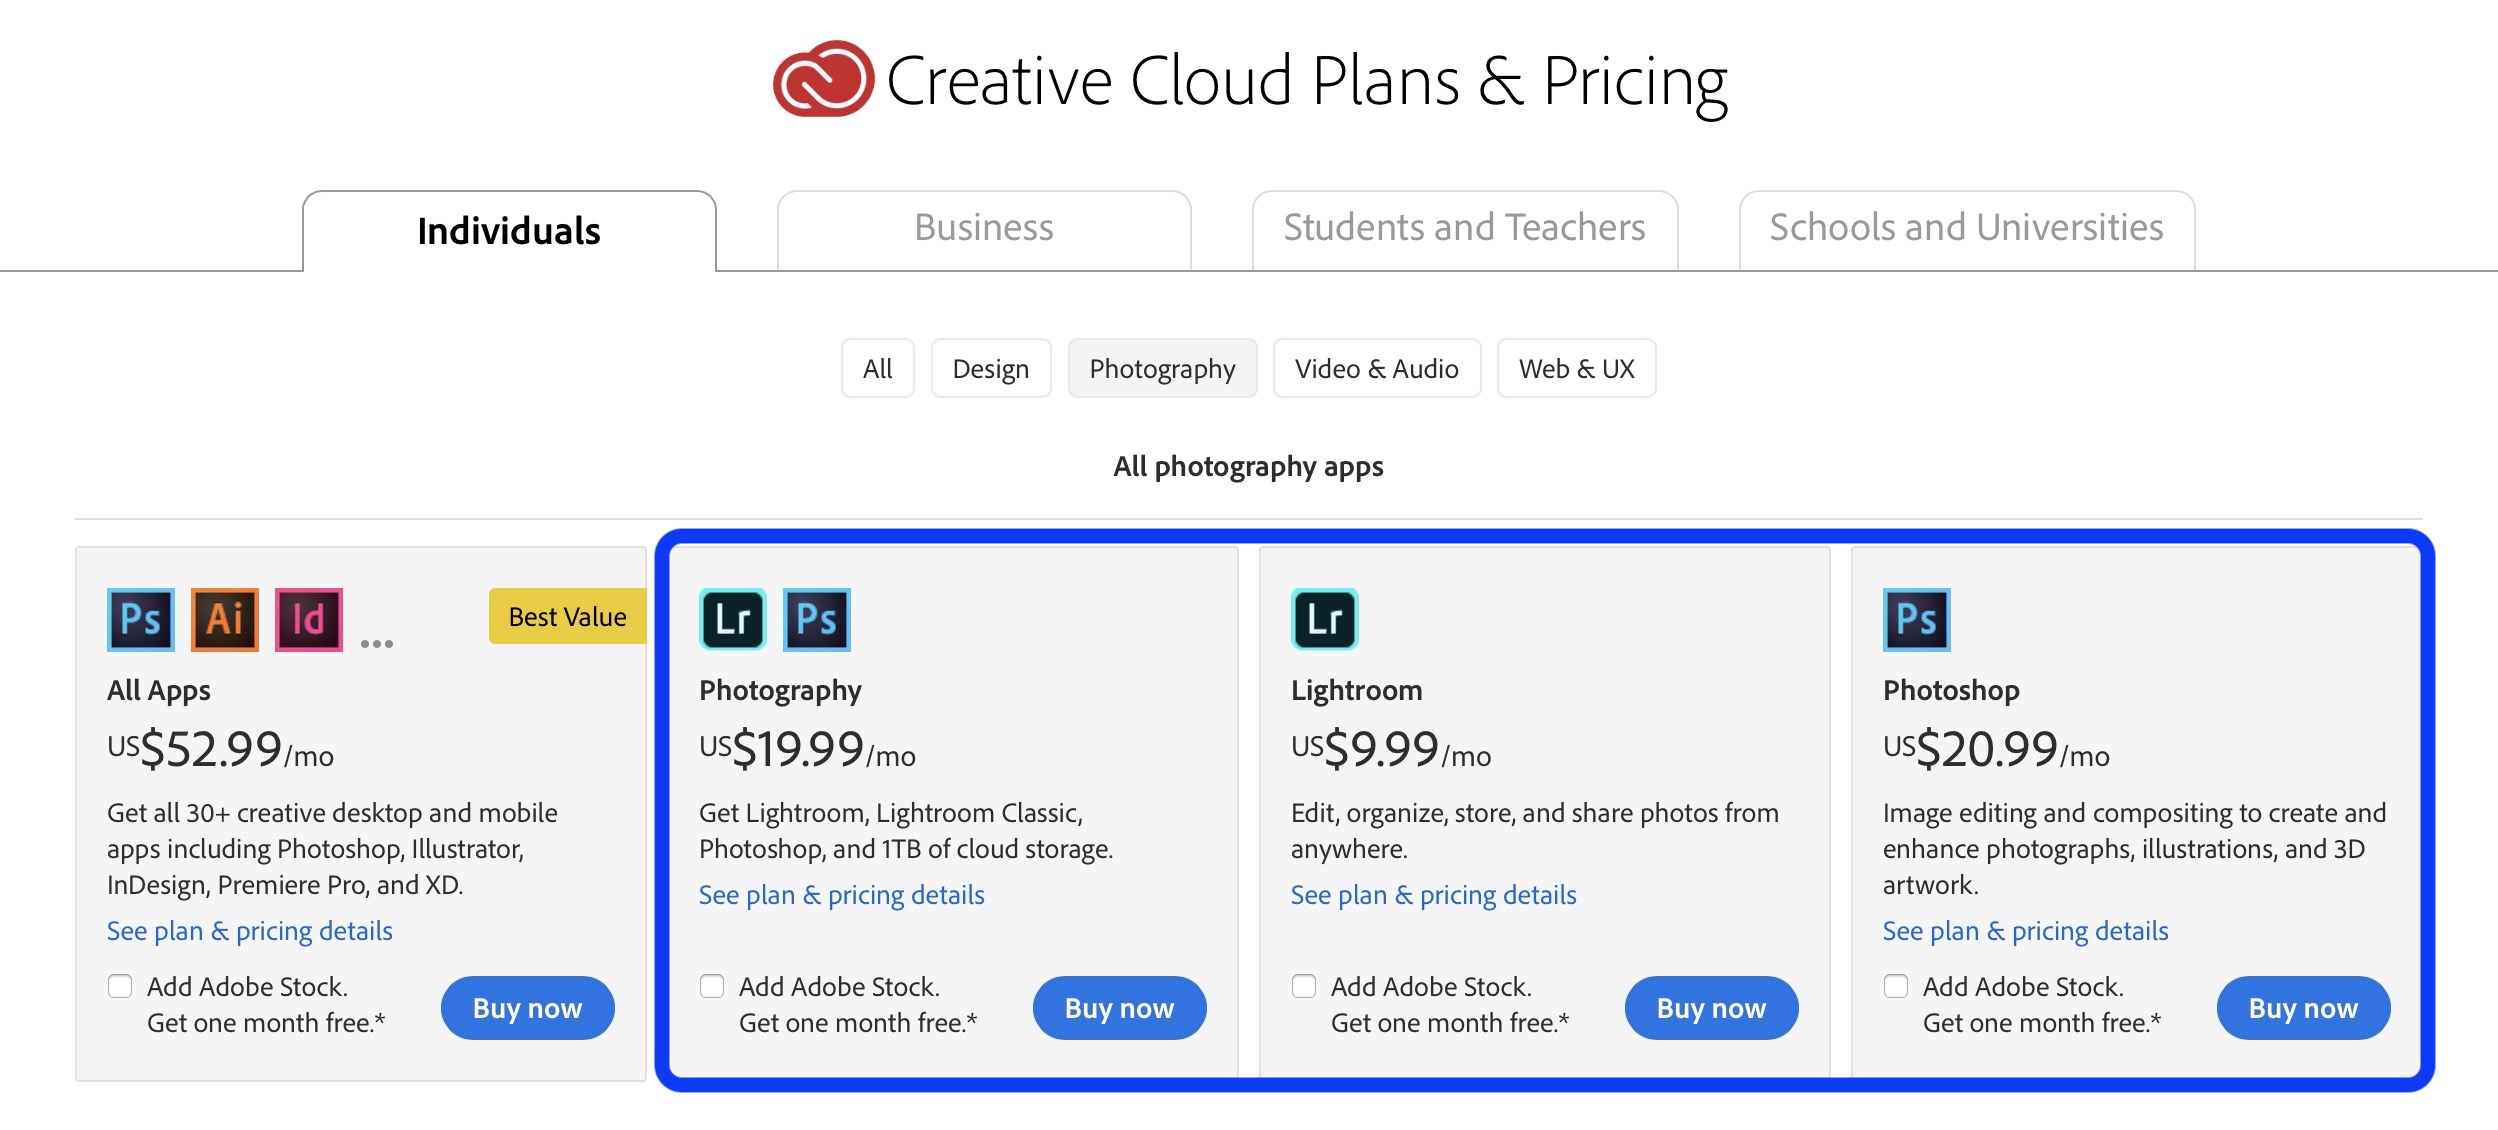 Adobe doubles the price of its 10/month Creative Cloud plan for